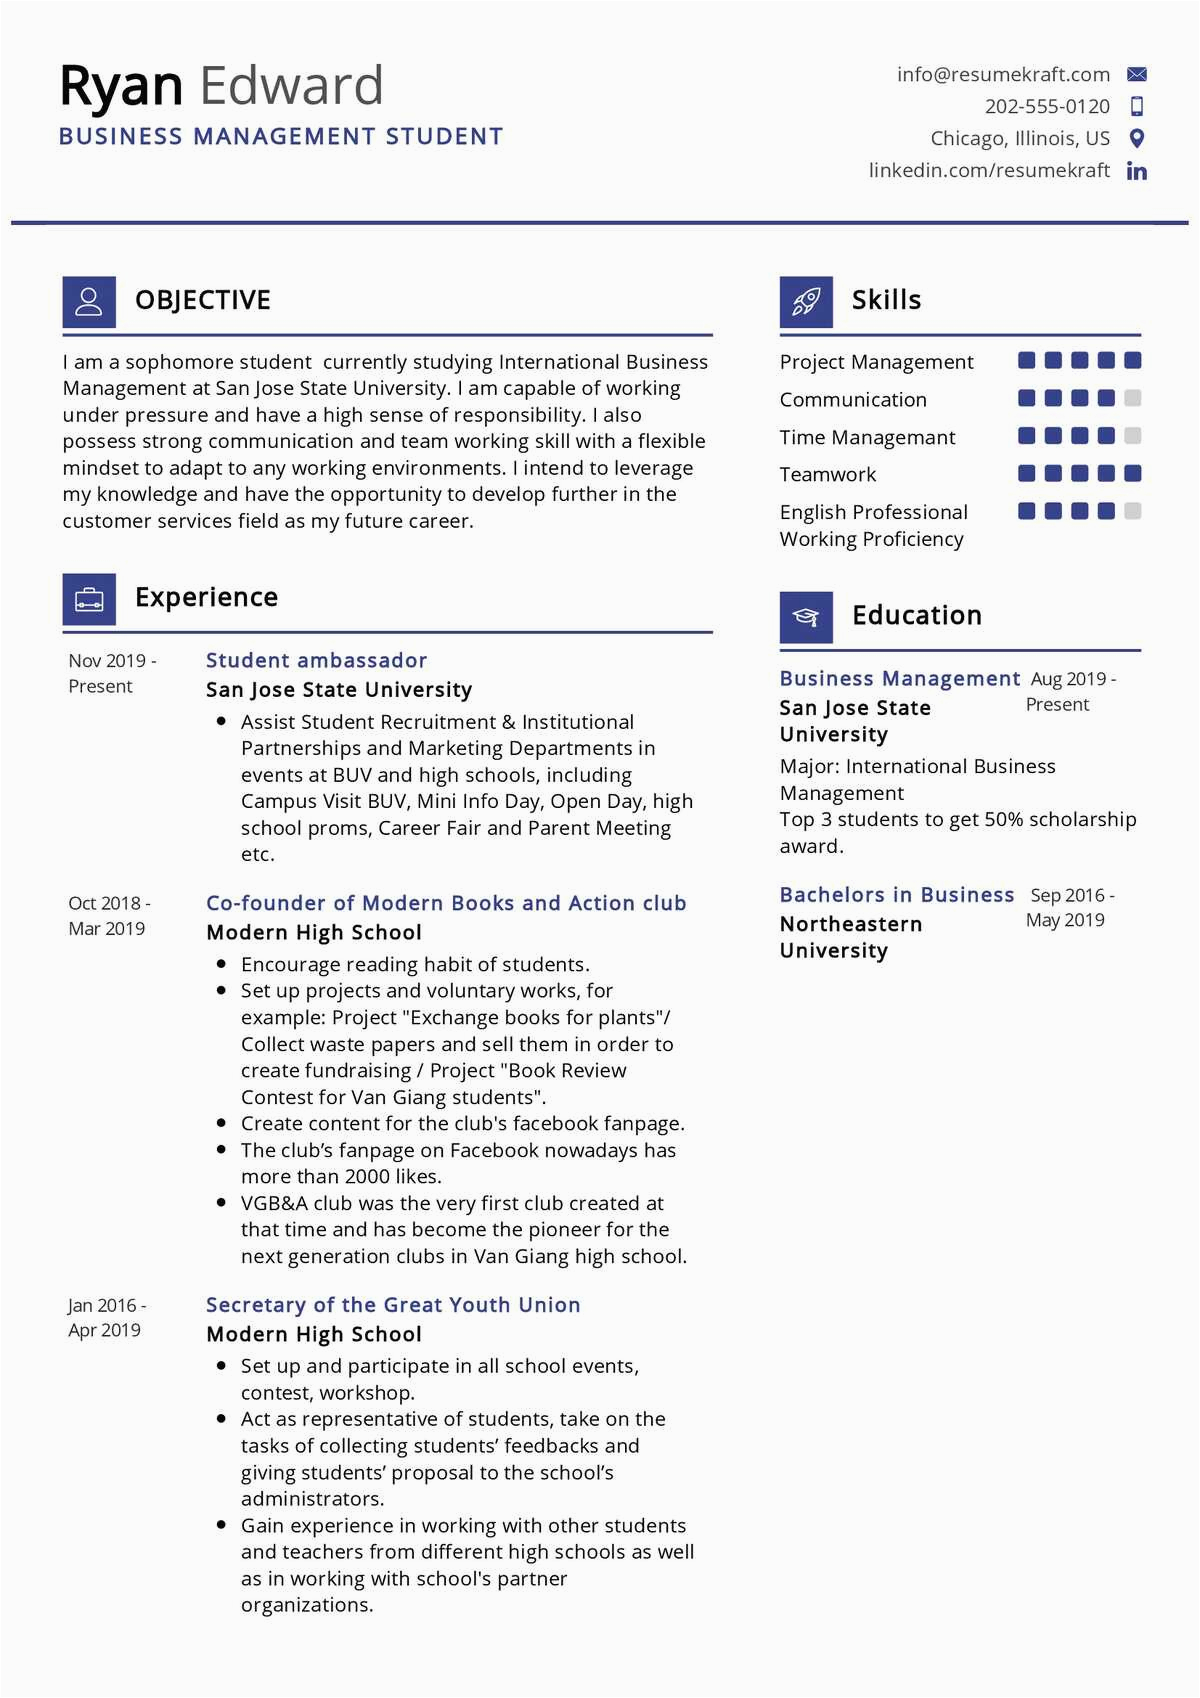 Sample Resume for Business Administration Student Business Management Student Resume Example Resumekraft